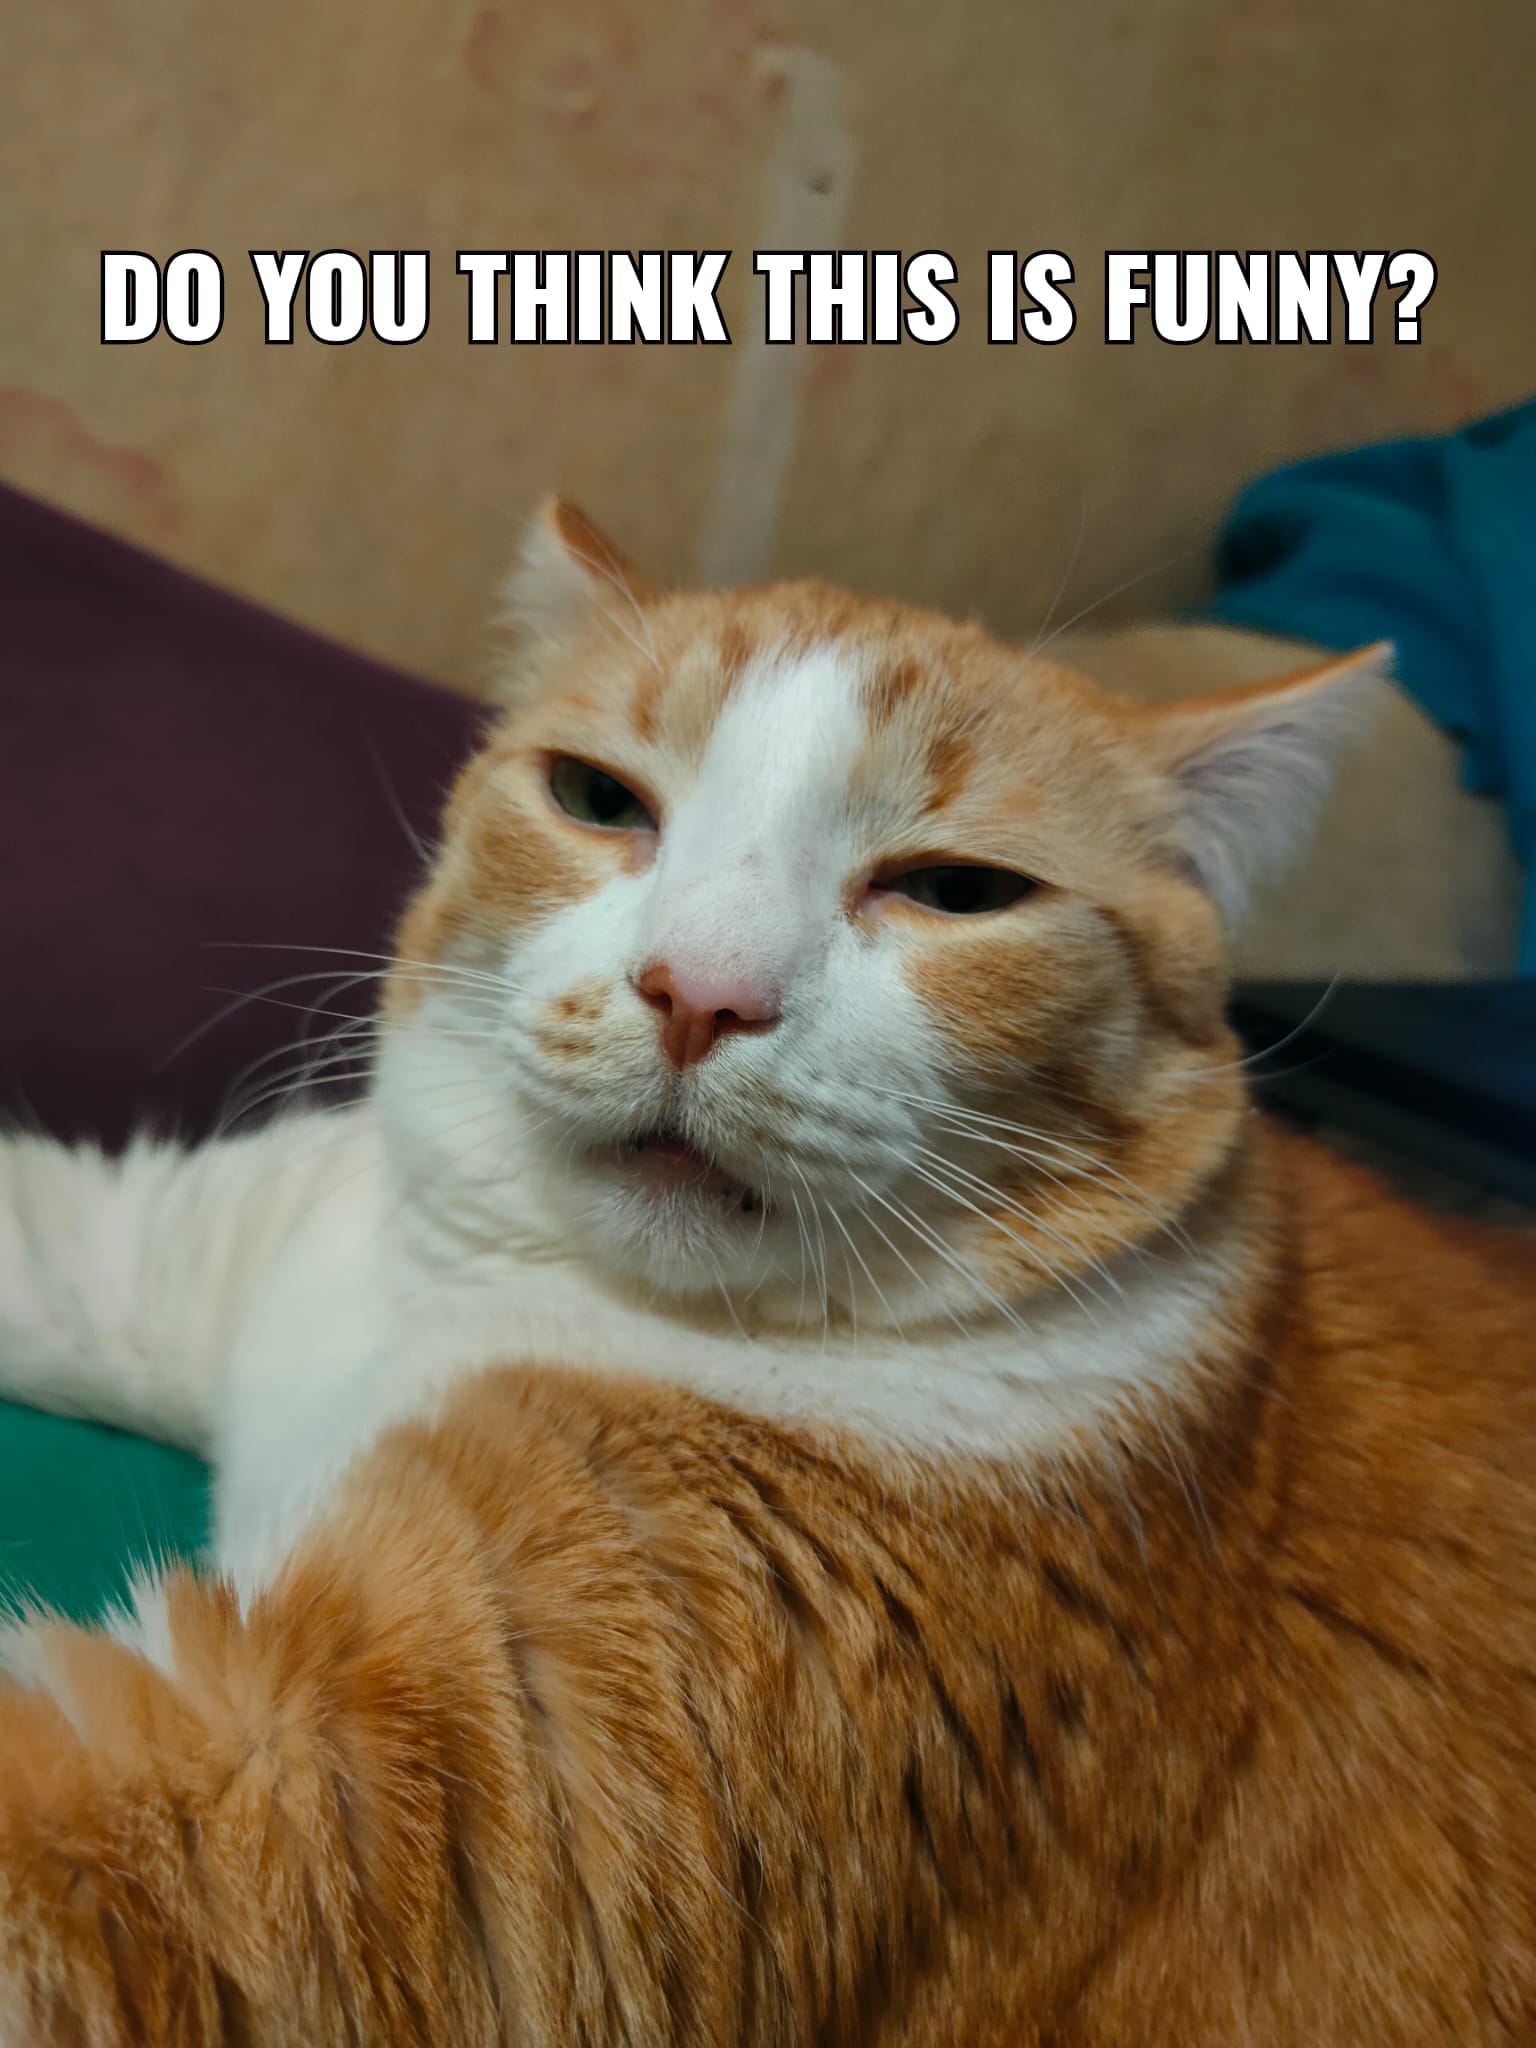 Cat: Do you think this is funny?